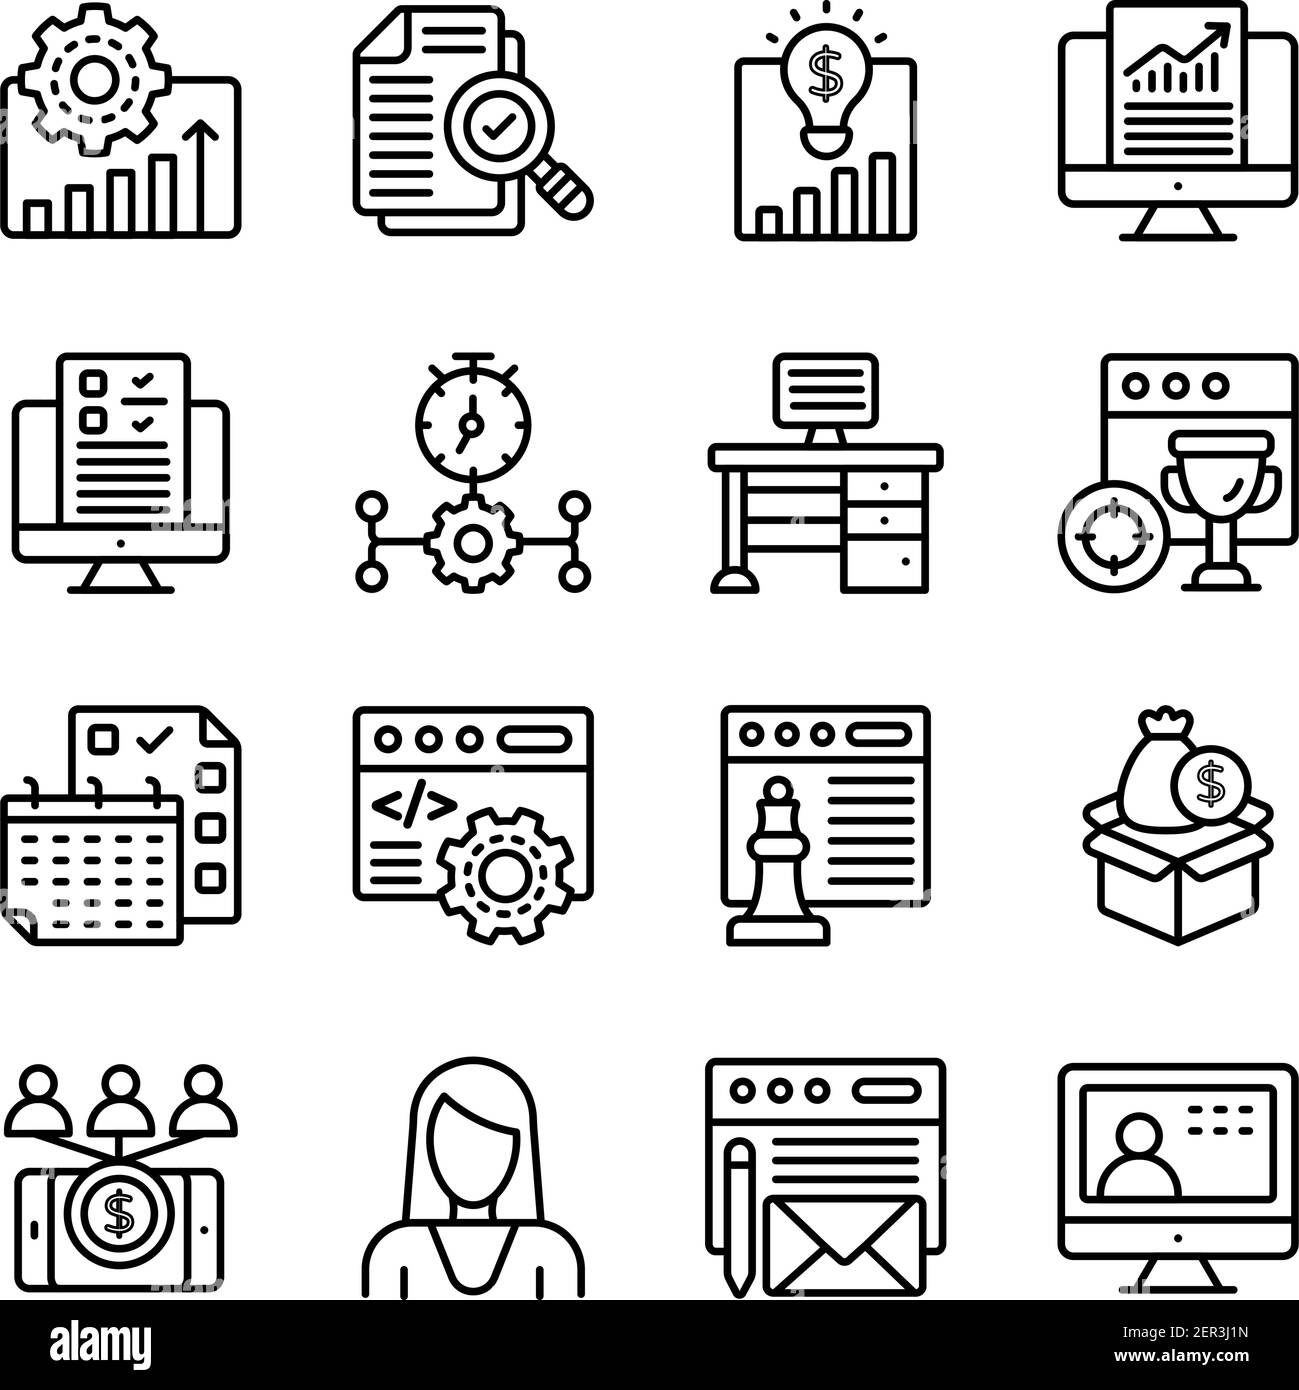 Business Management Linear Icons Pack Stock Vector